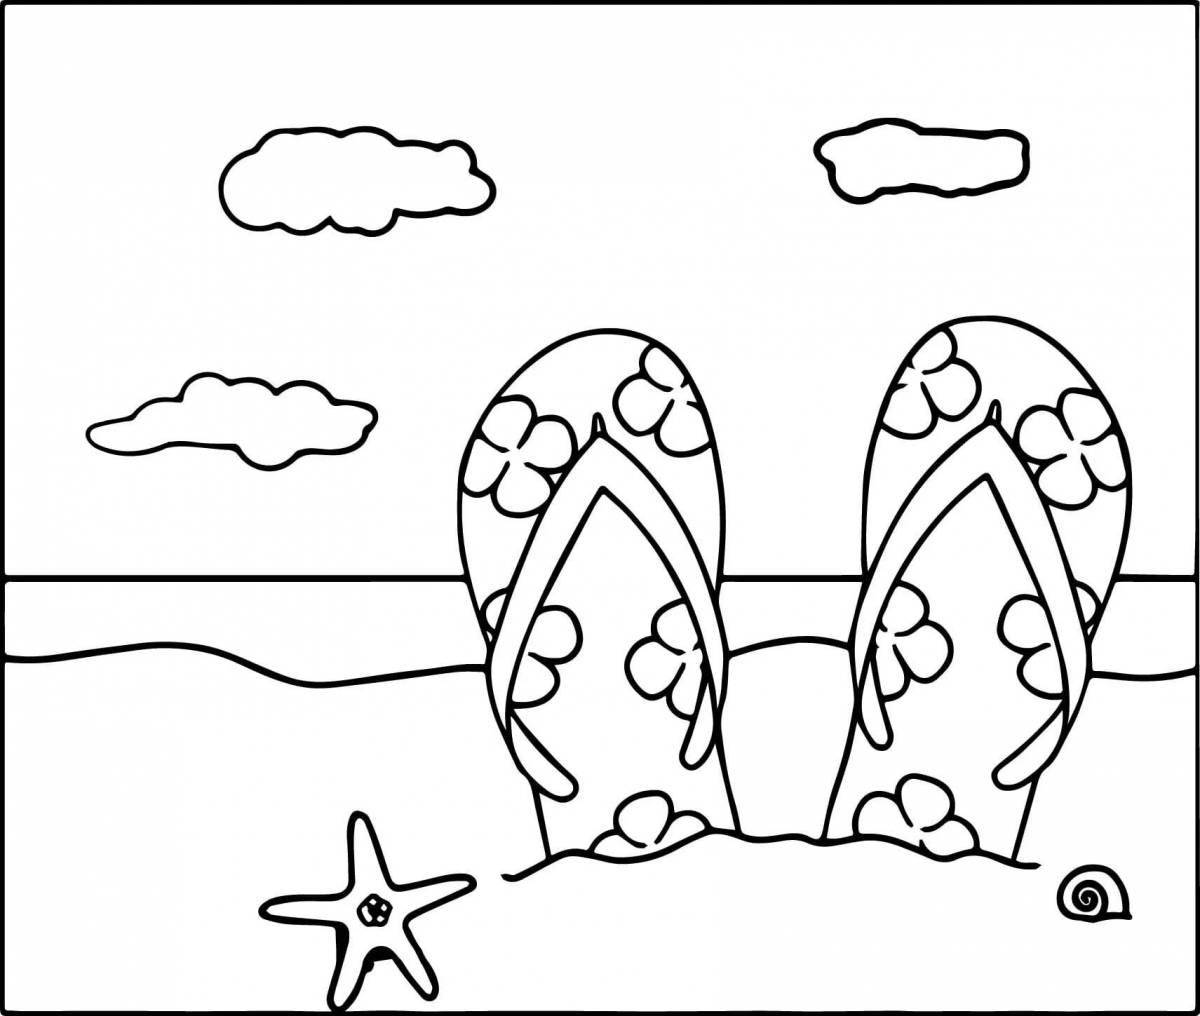 Glowing beach and sea coloring page